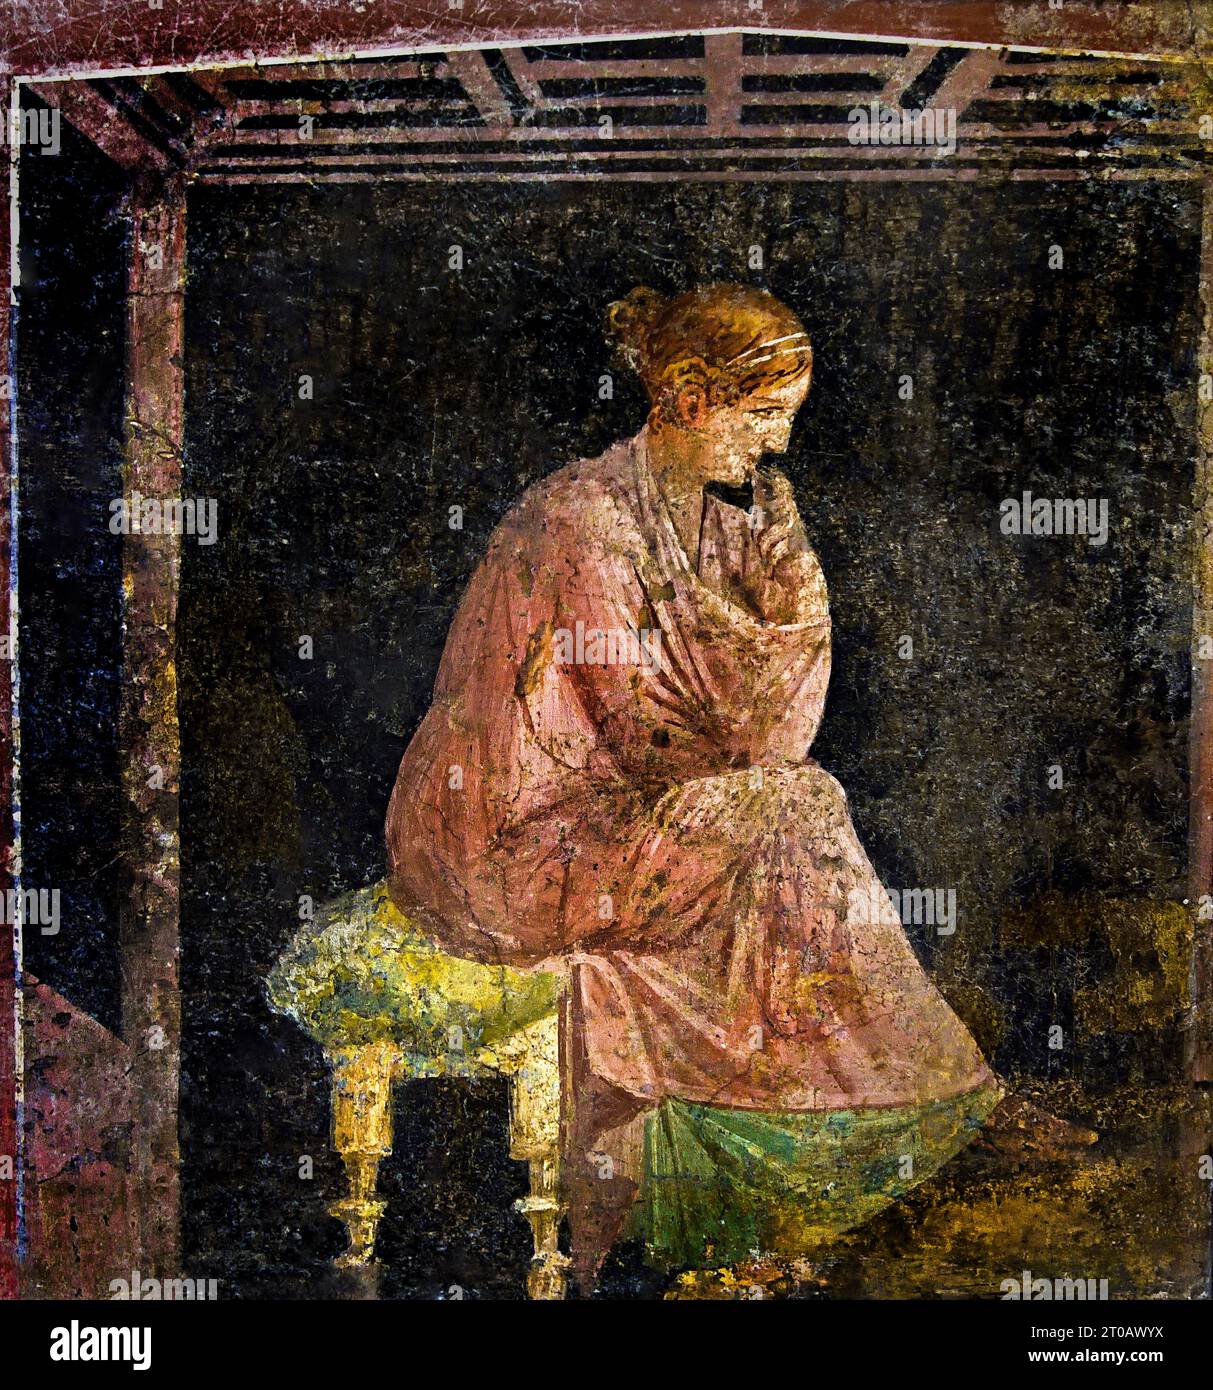 Roman women thinking from the Villa Arianna (Adriana), Stabiae (Stabia) near Pompeii Fresco Pompeii Roman City is located near Naples in the Campania region of Italy. Pompeii was buried under 4-6 m of volcanic ash and pumice in the eruption of Mount Vesuvius in AD 79. Italy Stock Photo